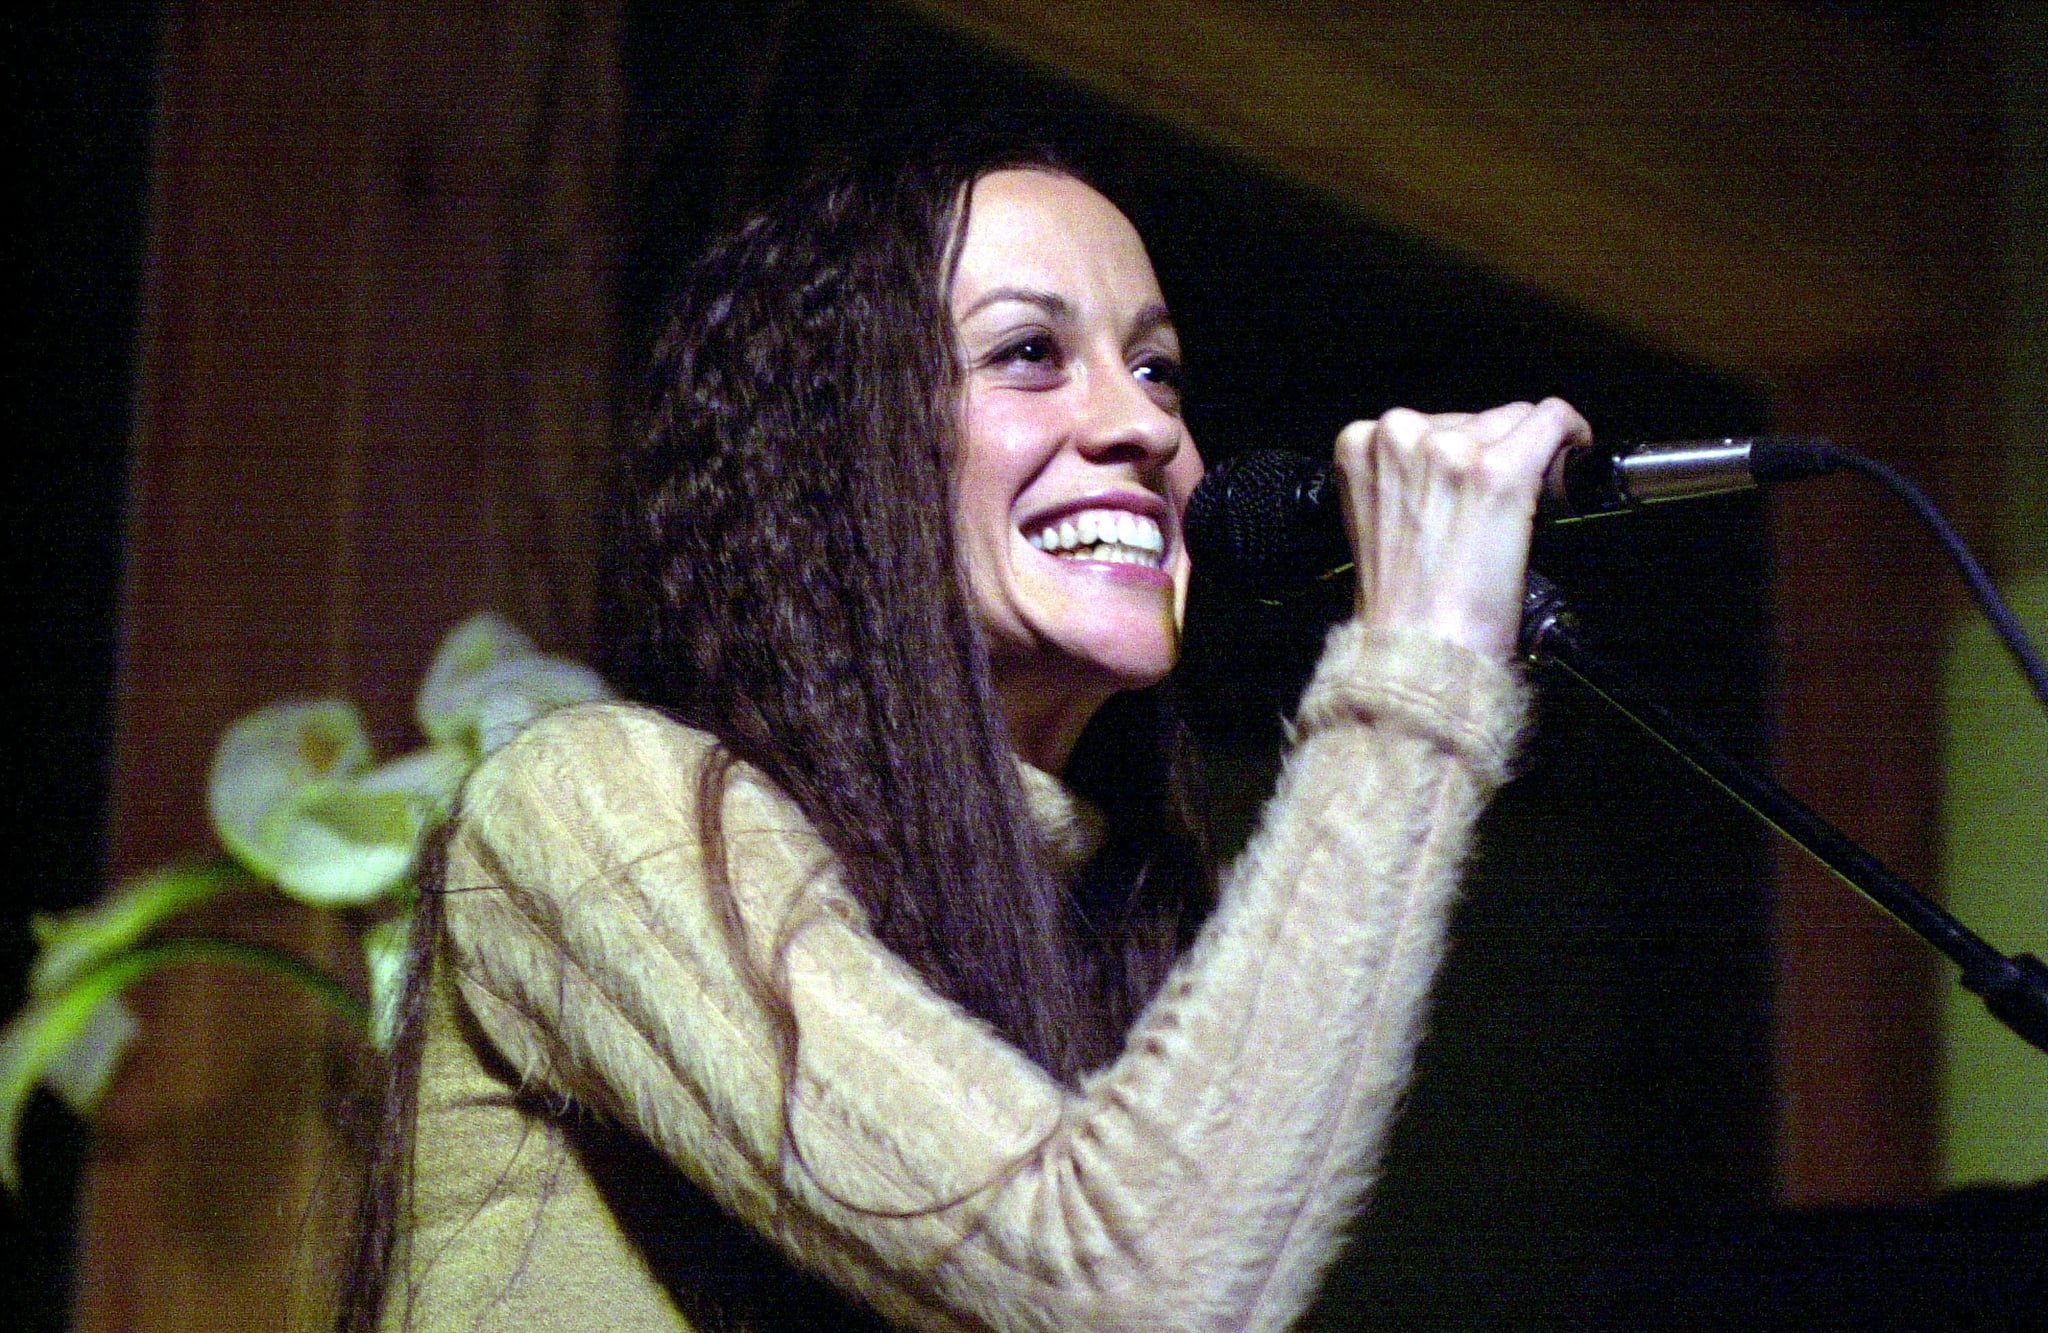 Alanis Morissette performing at the Chrysler Million Dollar Film Festival launch party (Photo by Theo Wargo/WireImage)